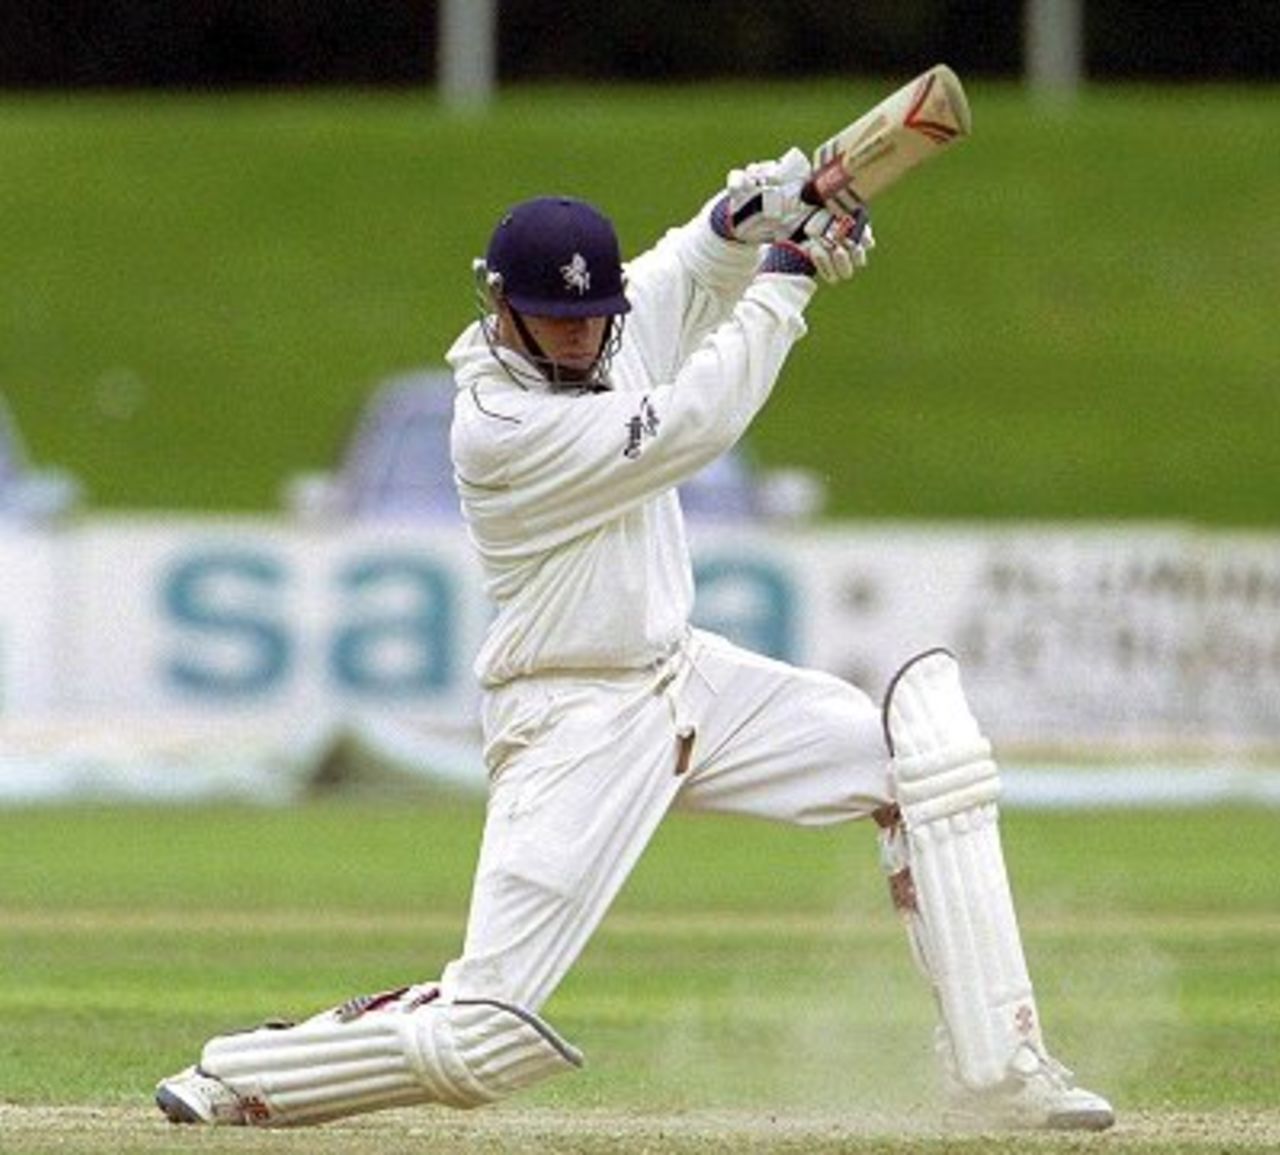 15 Jul 2000: David Fulton of Kent on his way to 65 not out against Derbyshire in the PPP healthcare County Championship match between Derbyshire v Kent at Derby, Derbyshire.